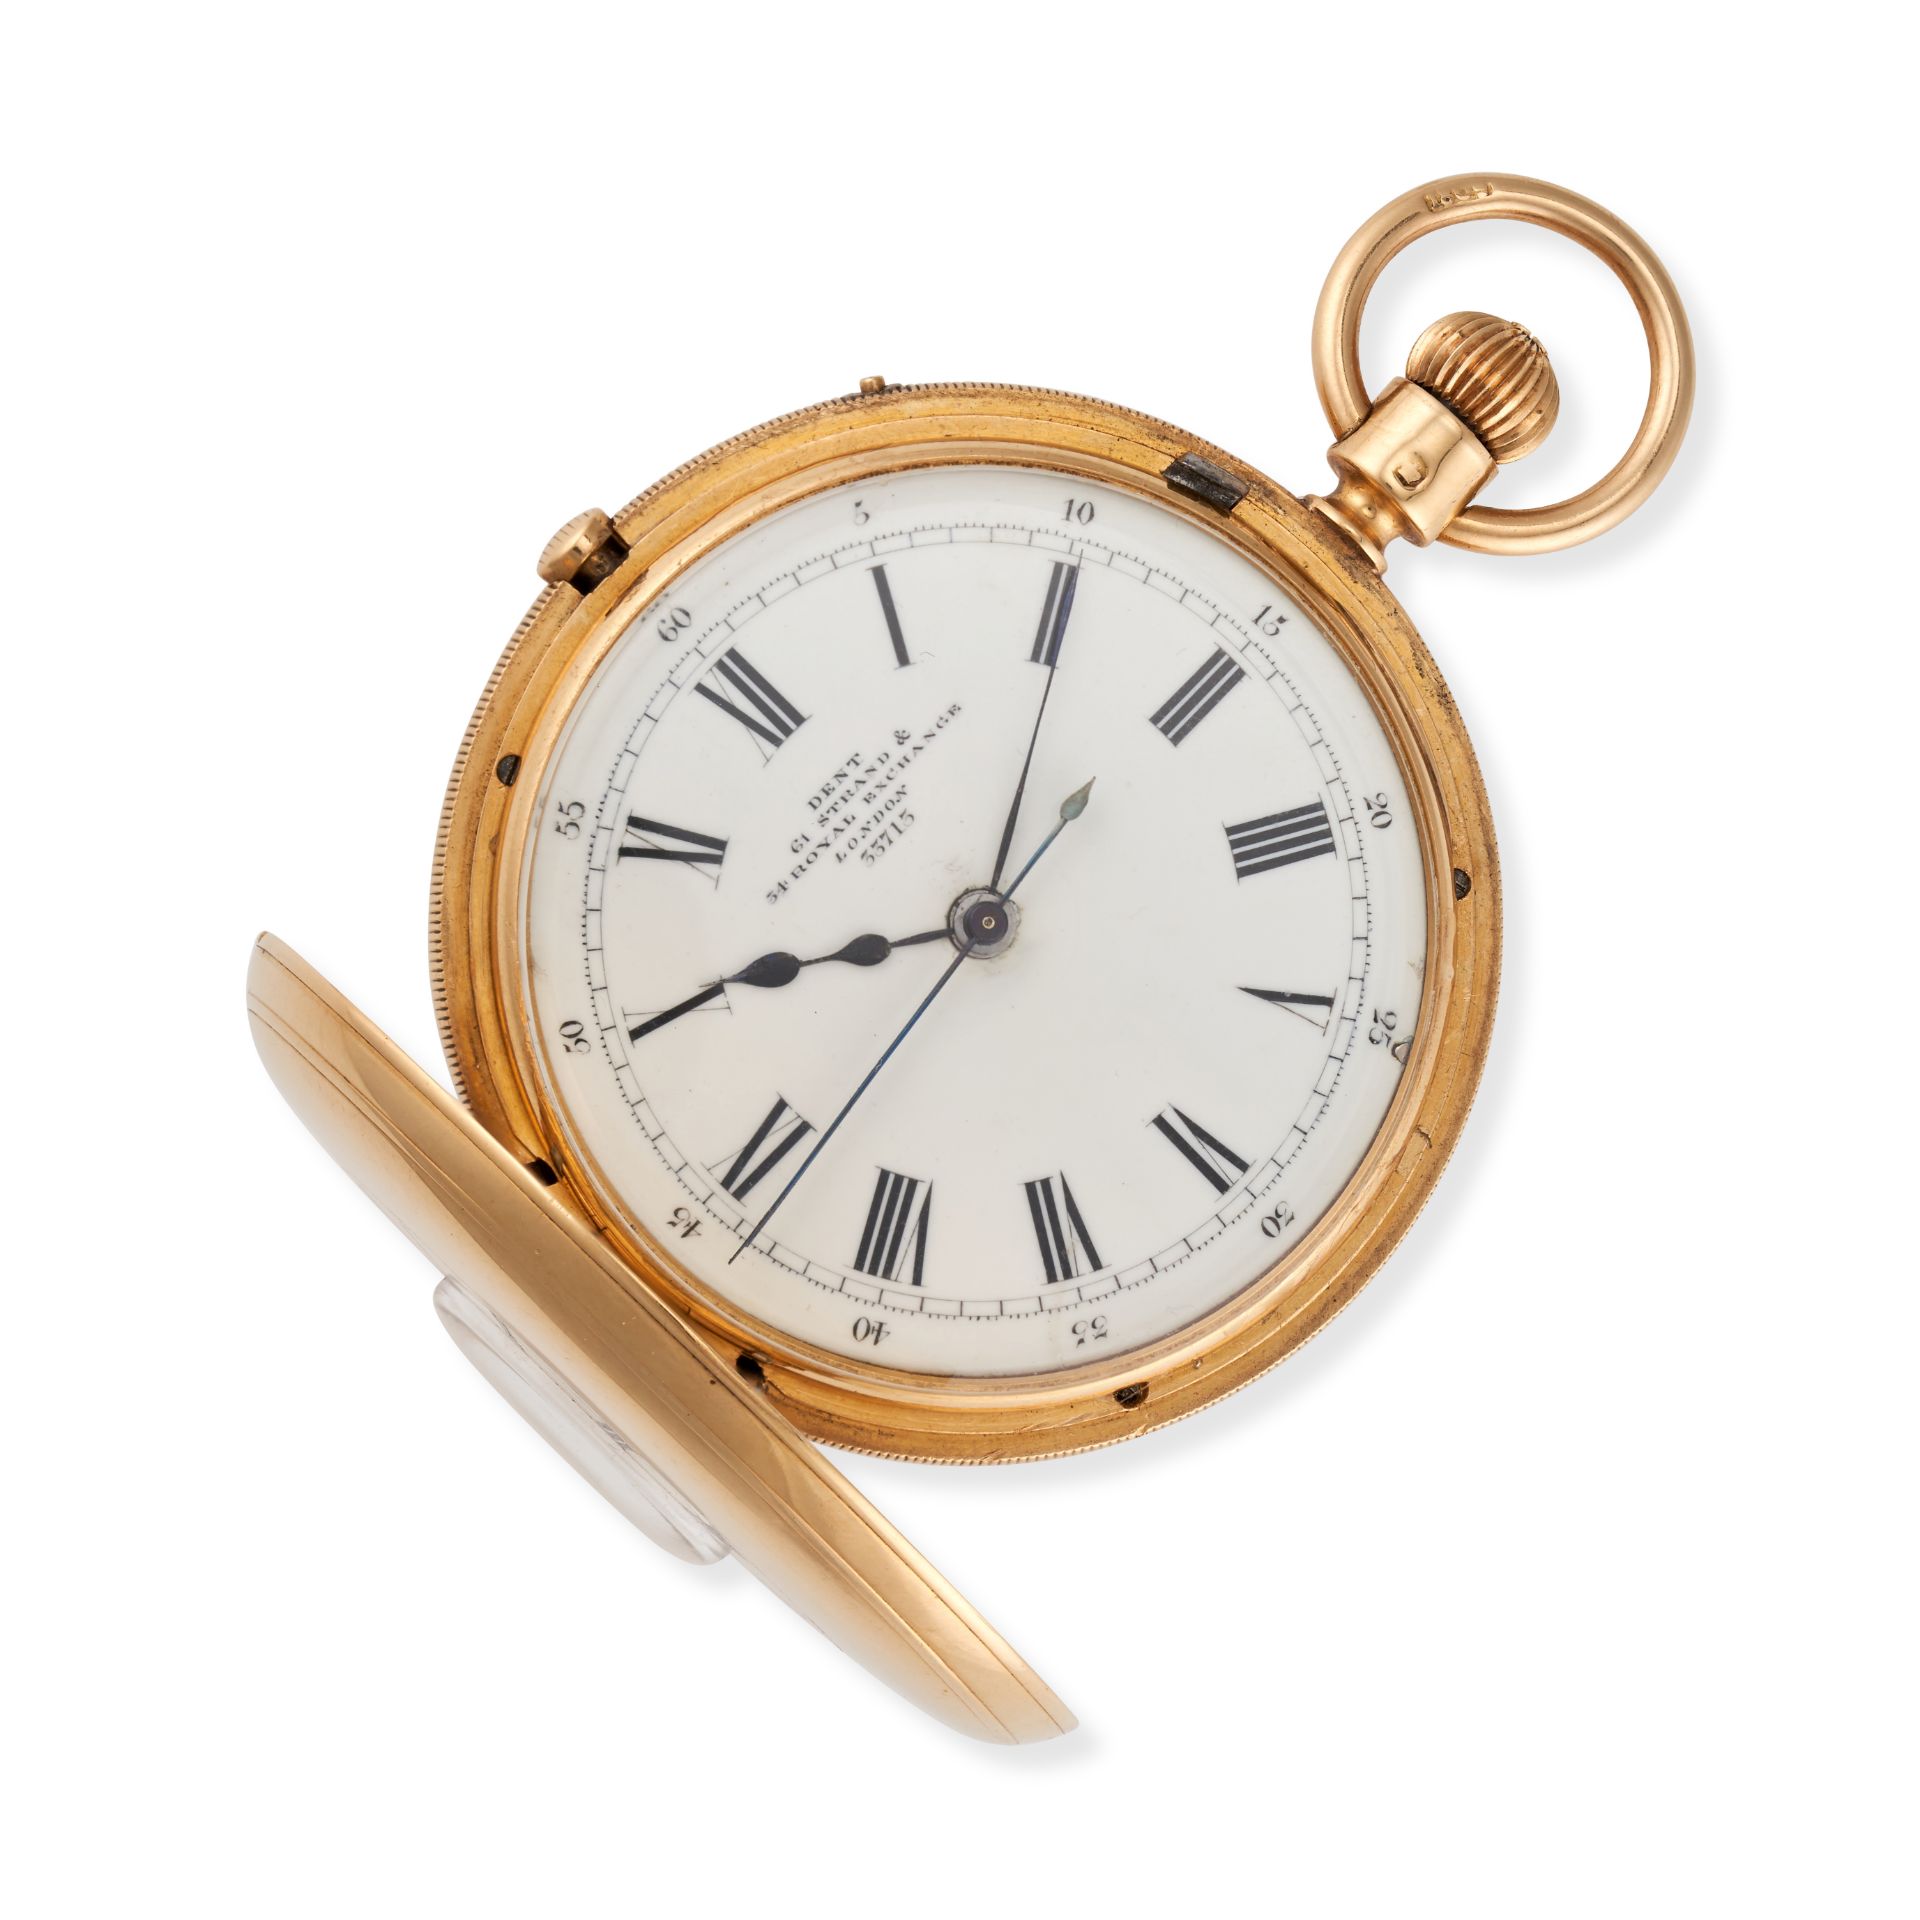 DENT - A DENT HALF HUNTER POCKET WATCH in 18ct yellow gold, the white porcelain dial with Roman n... - Image 2 of 2